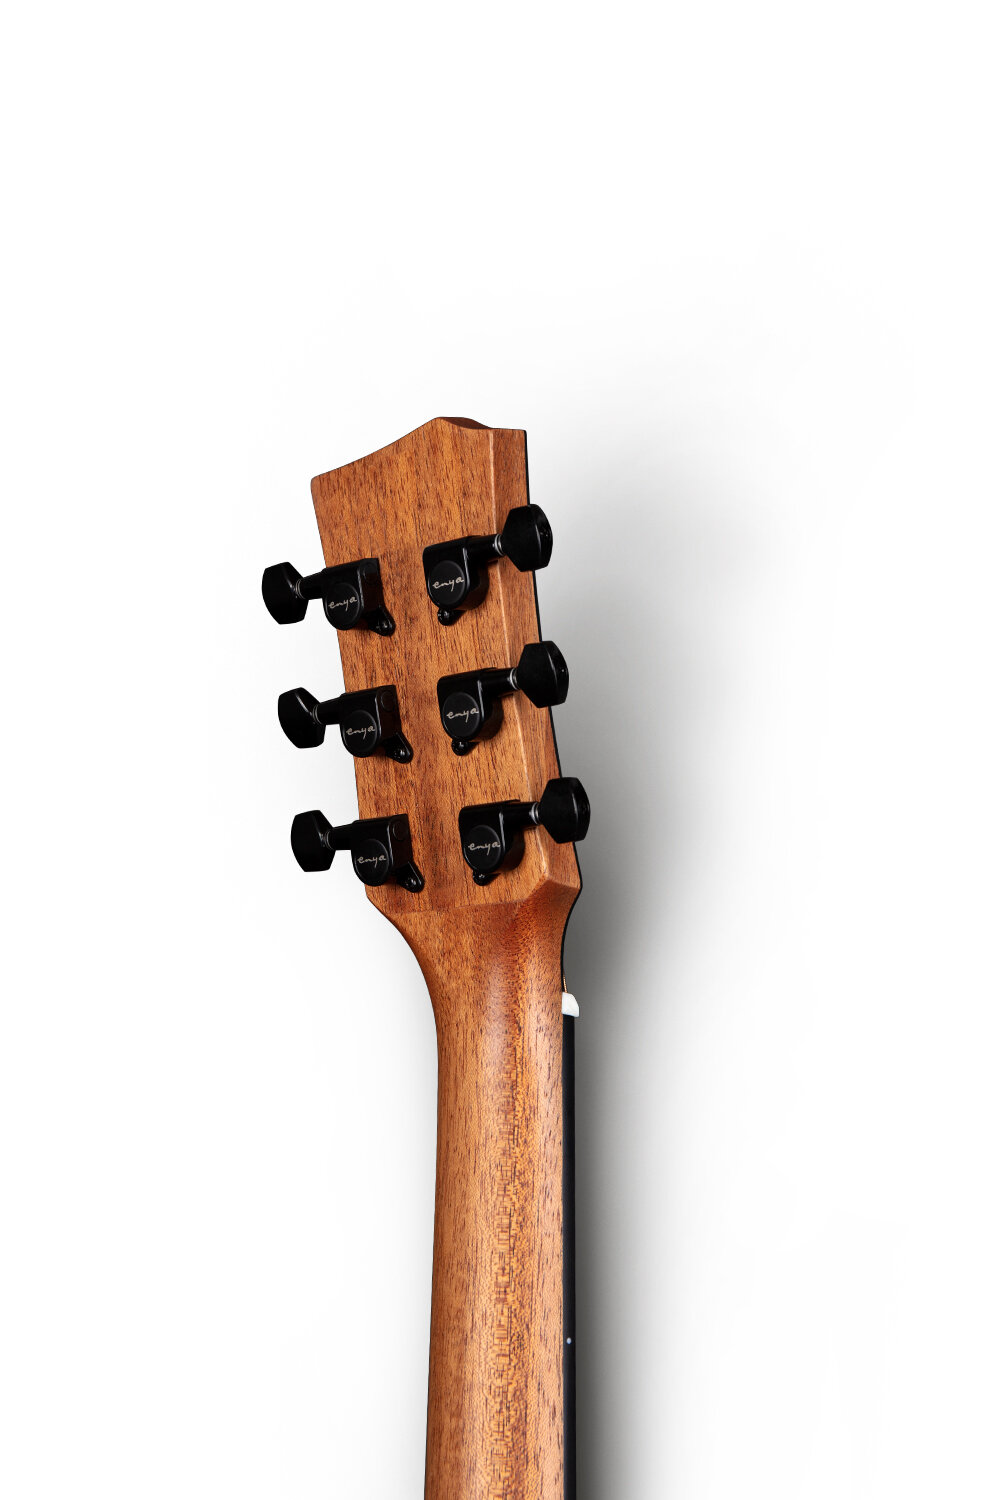 Data-driven playability - The neck is made of Congo mahogany. With the support of repeated palm sampling and several musician’s tests, CNC processing, making accurate and efficient in manufacturing process and super smooth playability.Enya BT bolting technology ensuring smooth playability!